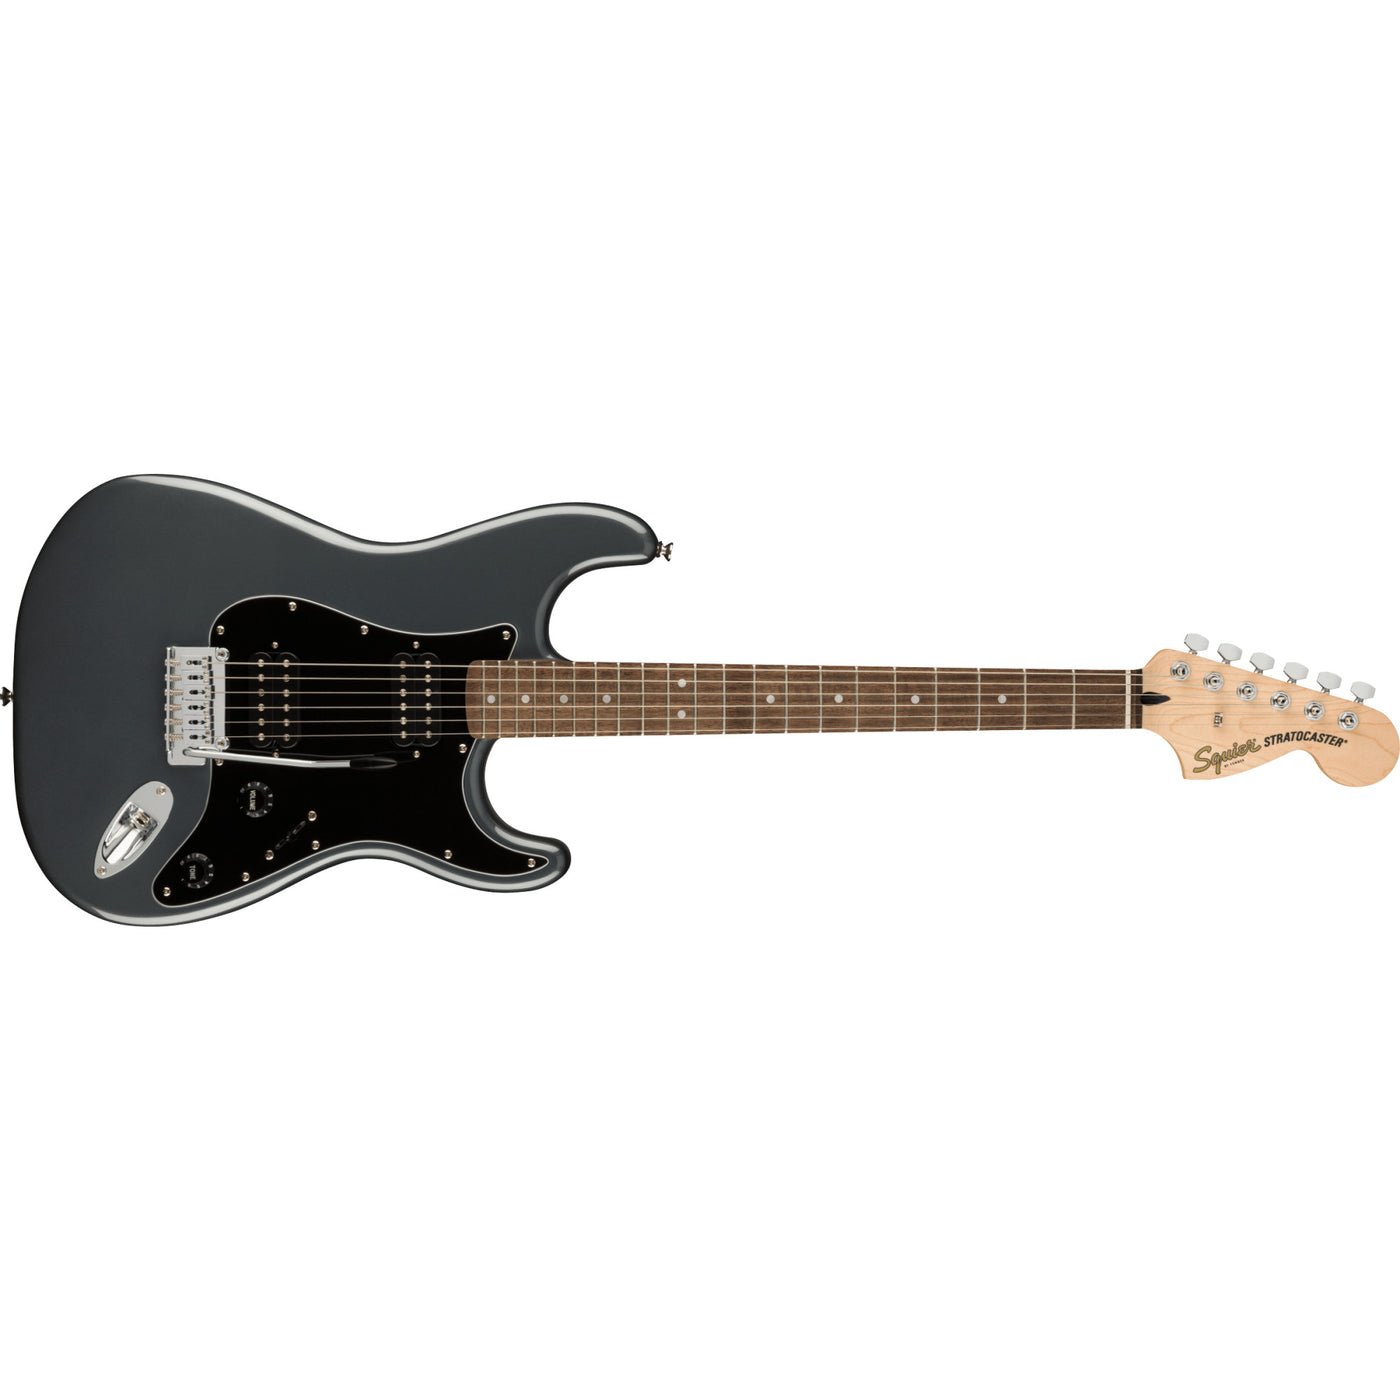 Fender Affinity Series Stratocaster HH Electric Guitar, Charcoal Frost Metallic (0378051569)